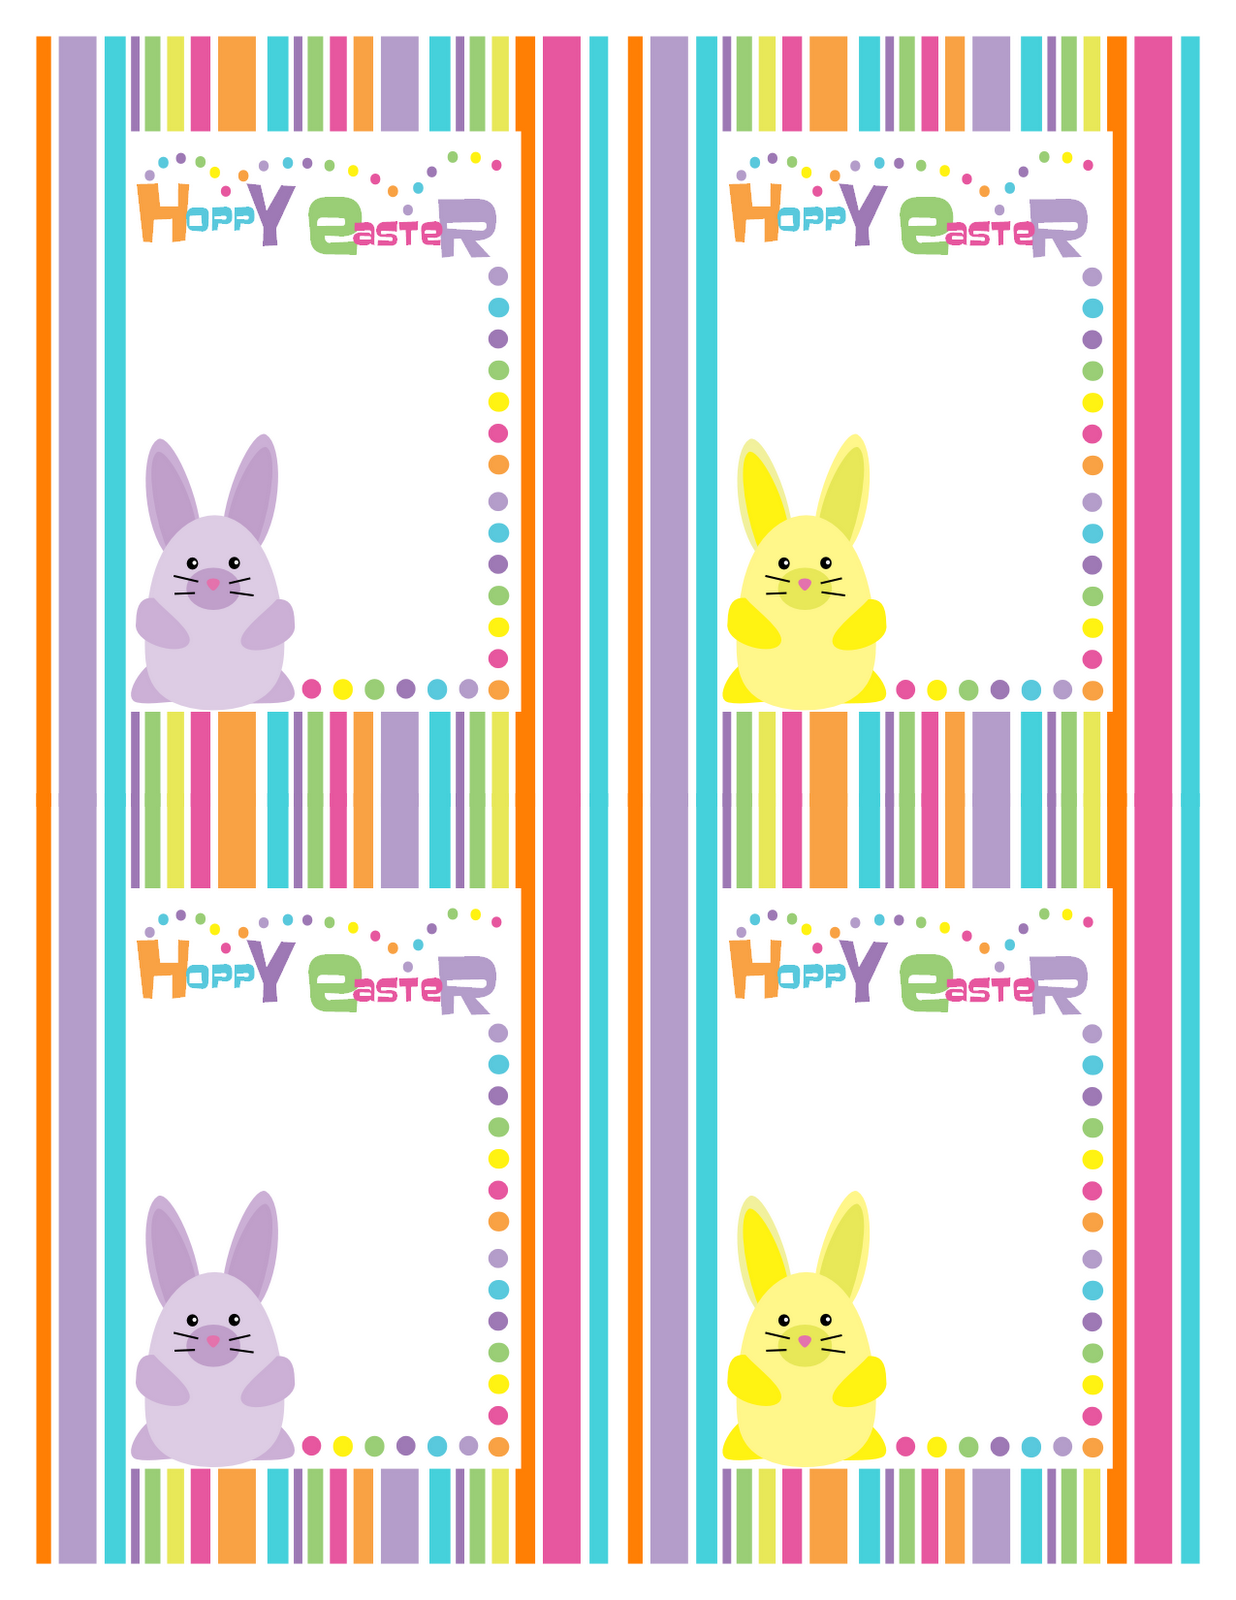 bunny-stripe-hoppy-easter-cards-free-download-cute-printables-template